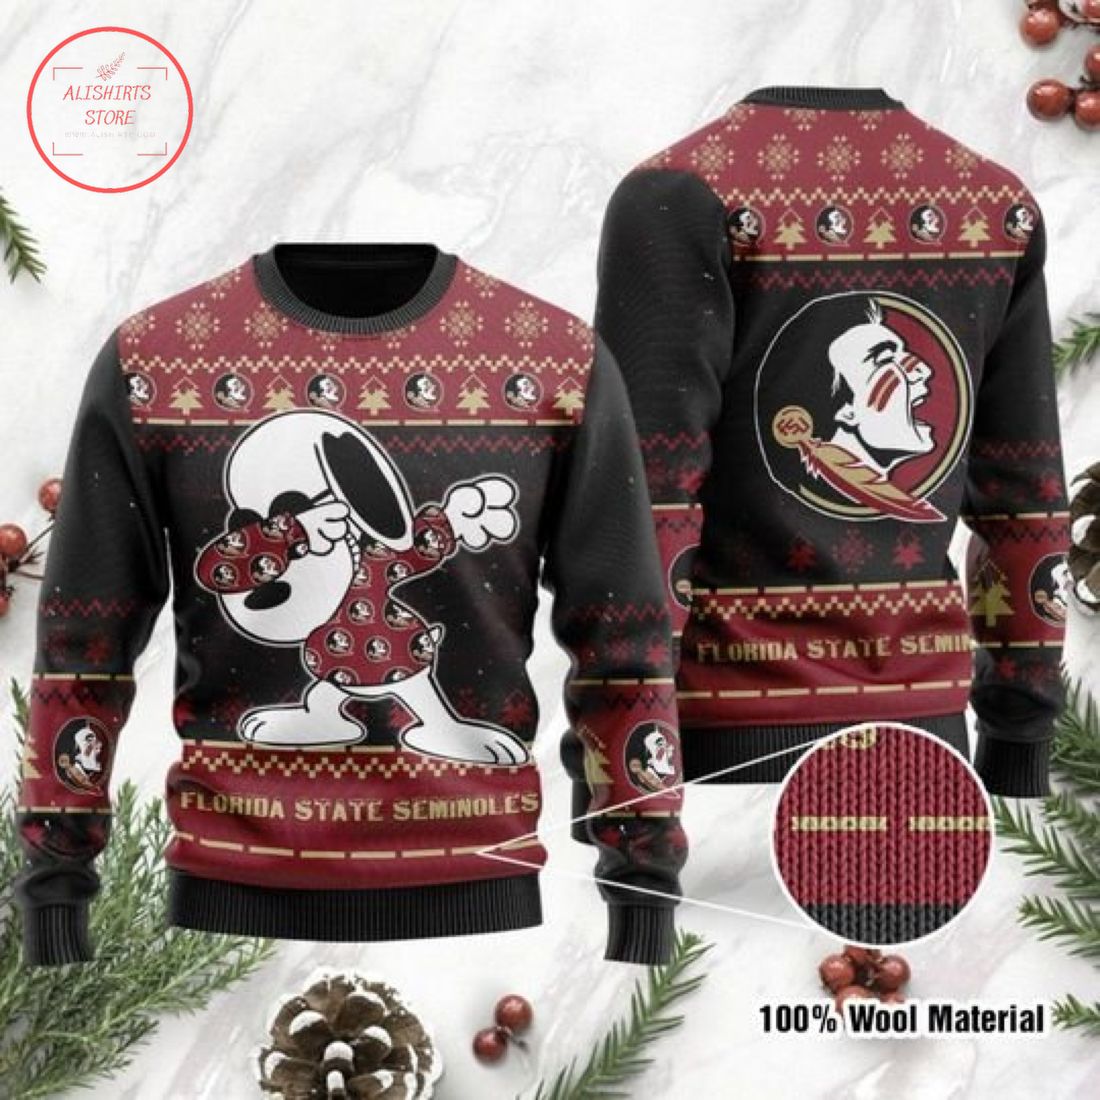 Florida State Seminoles Snoopy Ugly Christmas Sweater